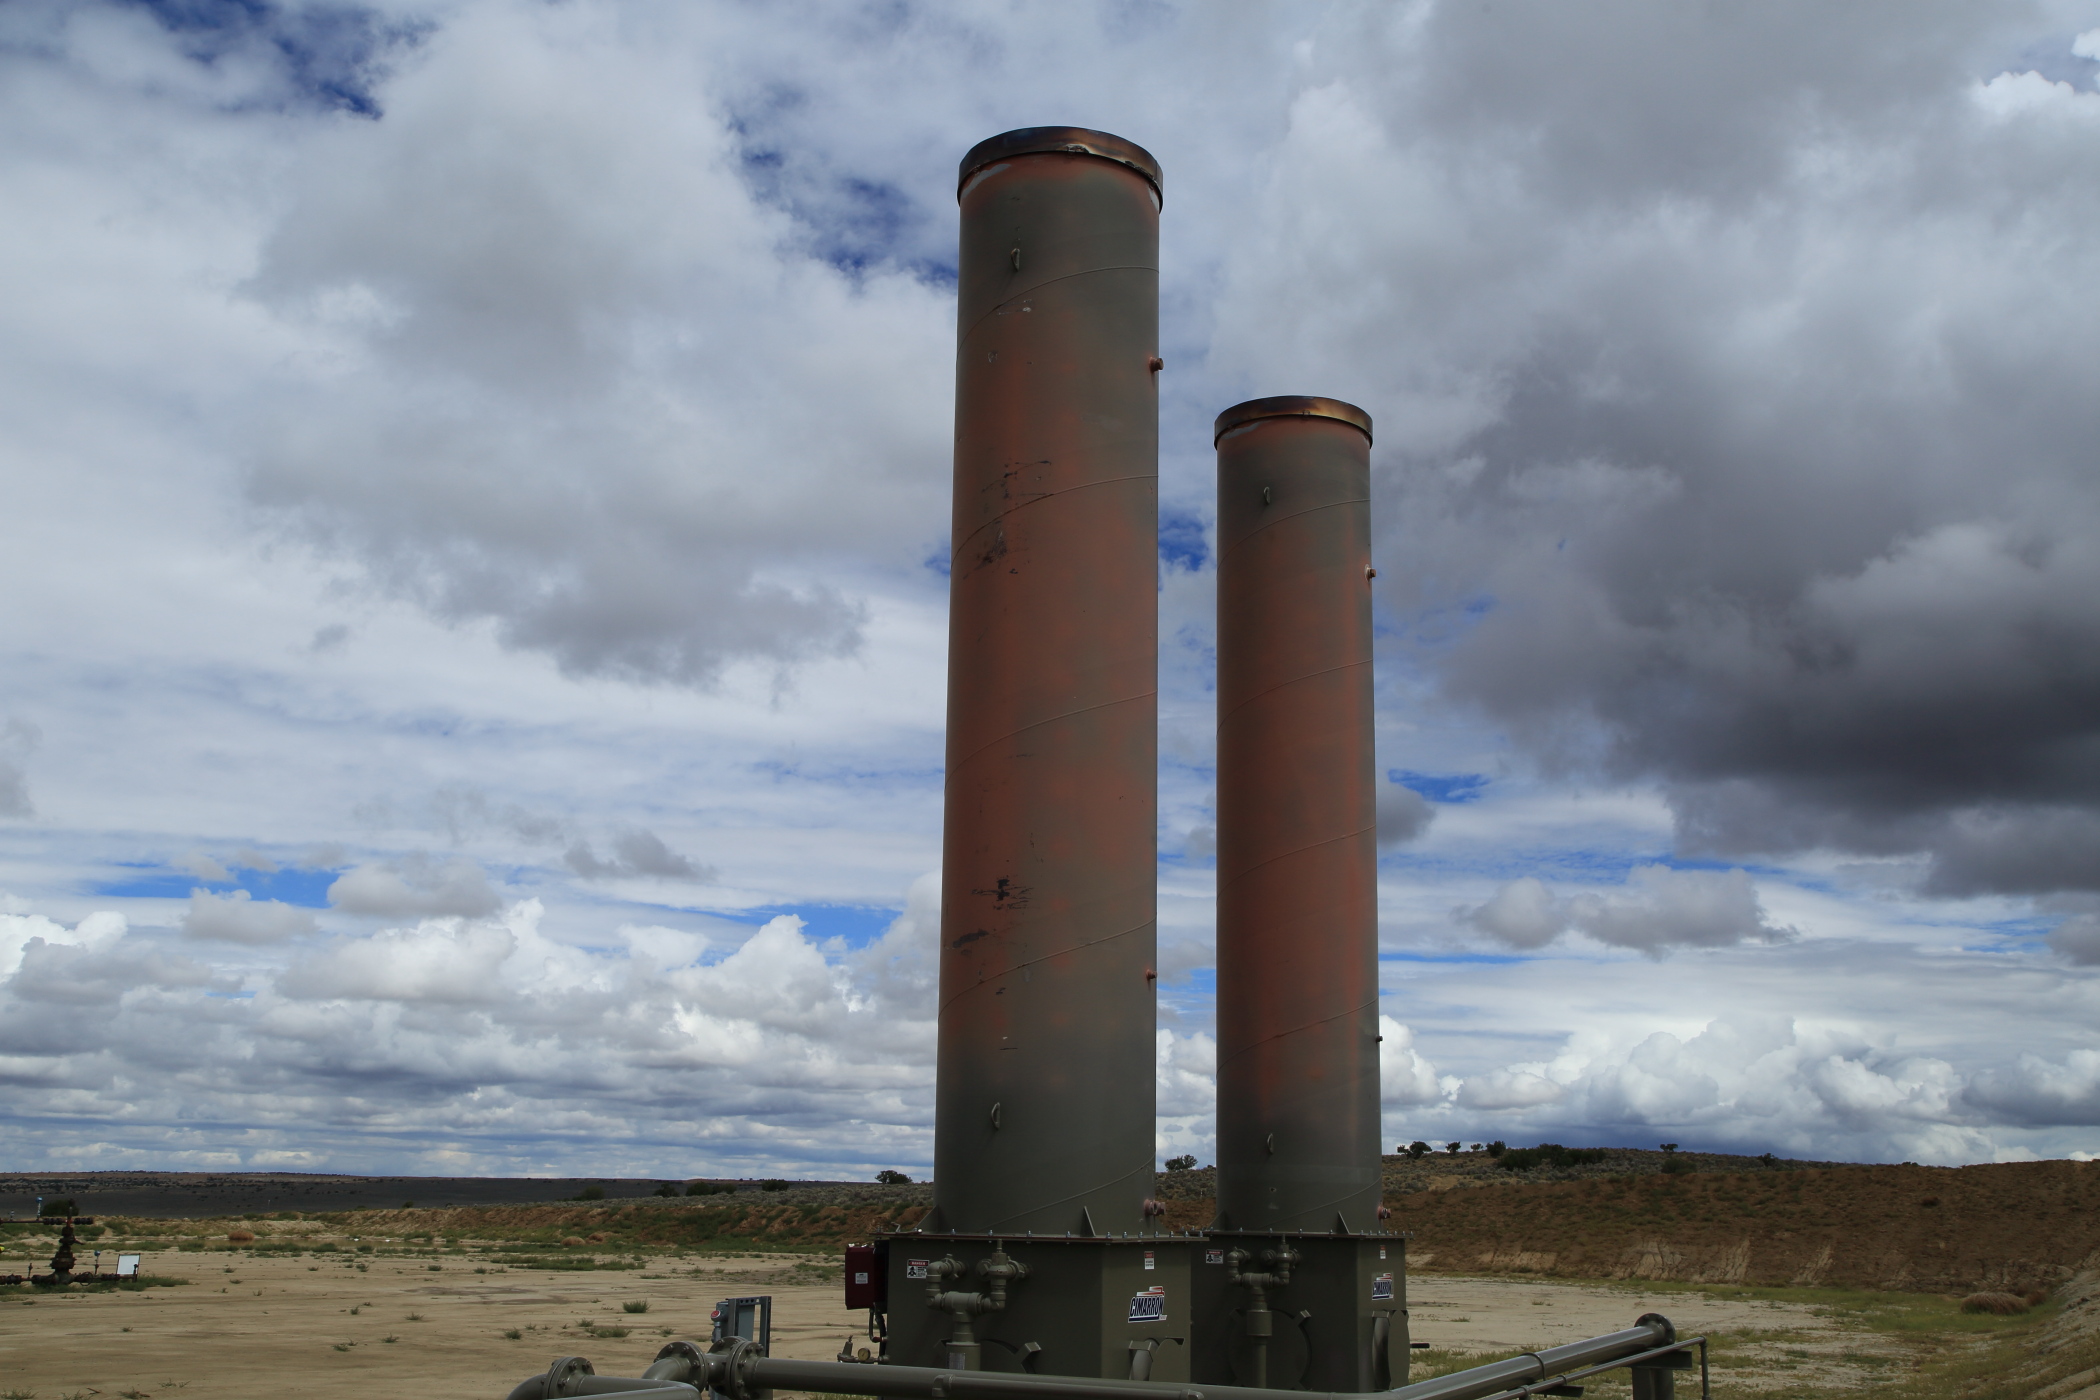 Smokestacks at a frack well installation, tinted red by high temperature gases, thrust above landscape of Greater Chaco in the Counselor Chapter of the Navajo Nation's Eastern Agency in New Mexico.